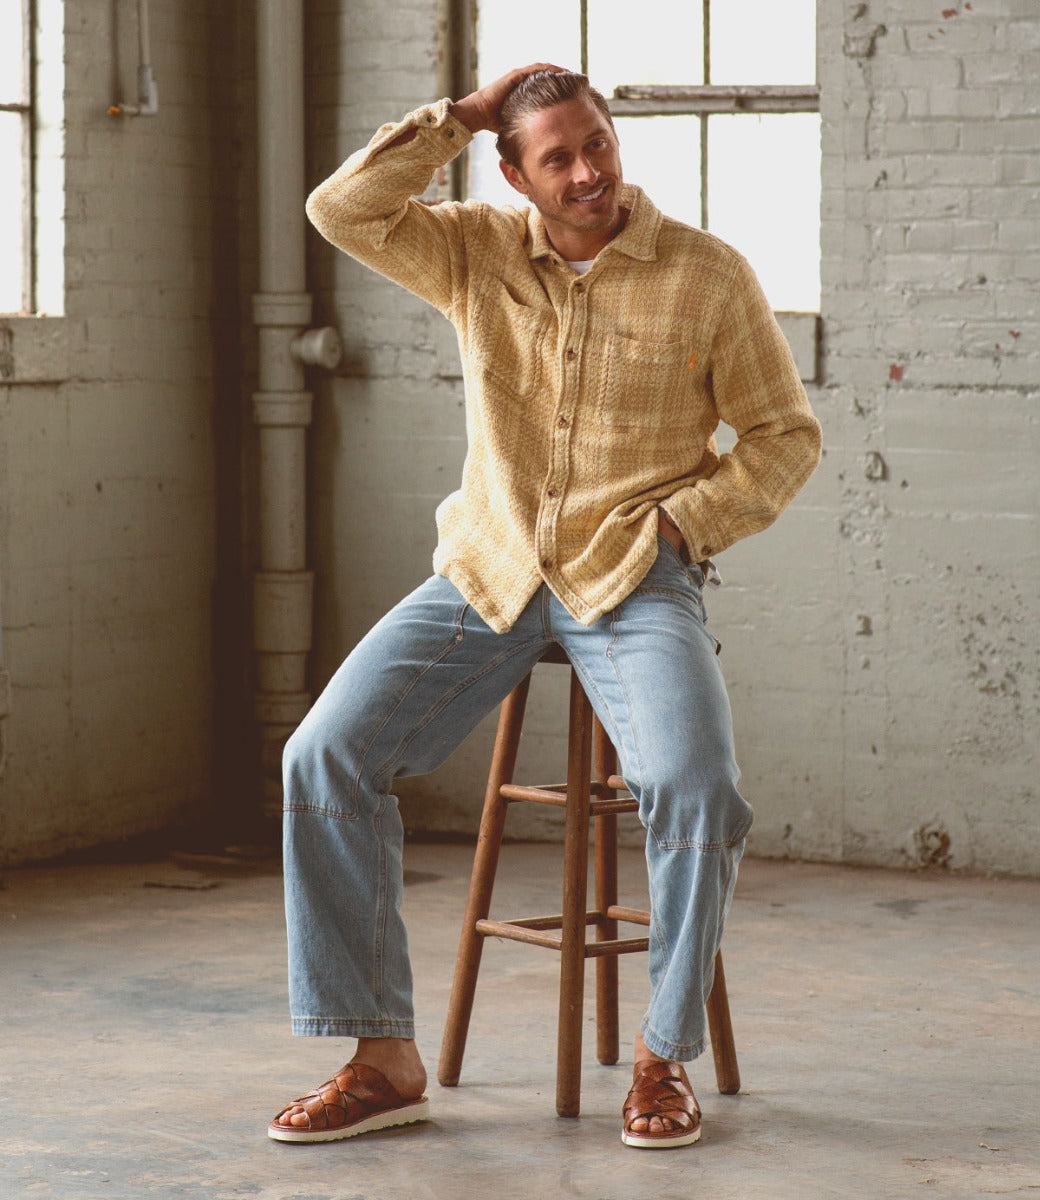 A man sitting on a stool wearing a Bed Stu Abraham Light shirt and jeans.